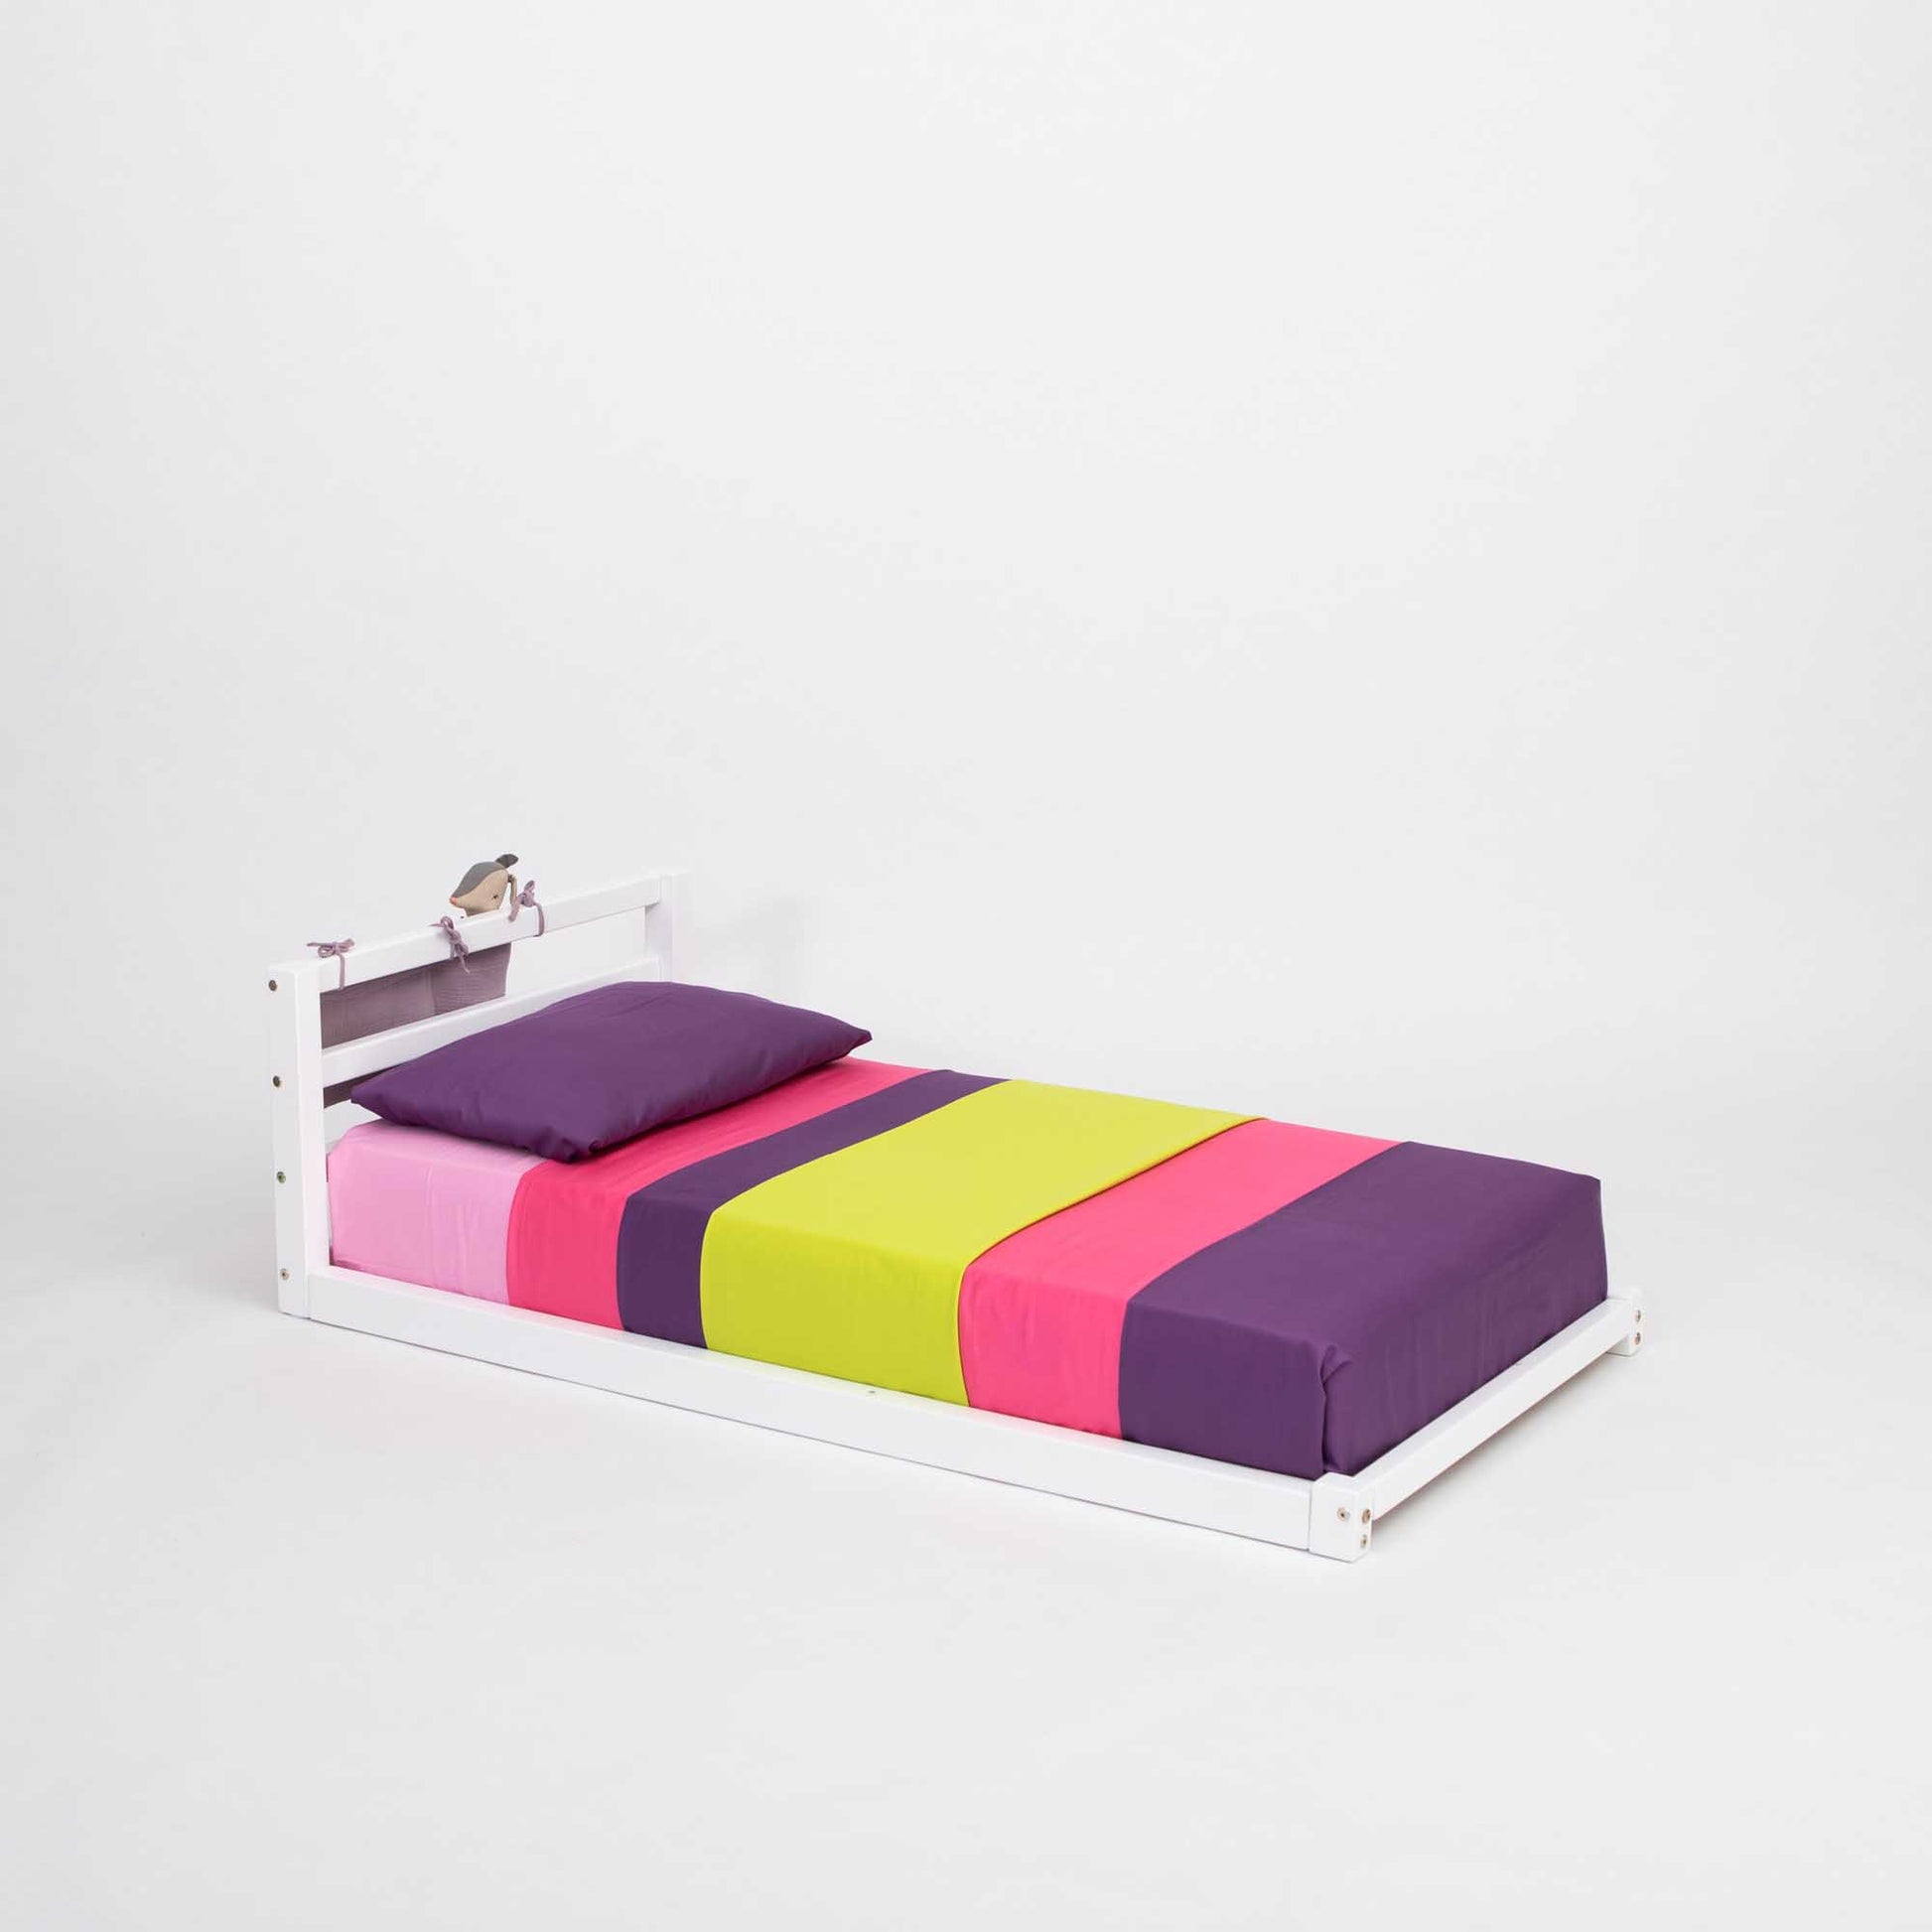 A Sweet Home From Wood 2-in-1 transformable kids' bed with a horizontal rail headboard, designed with a purple, pink, and green stripe, perfect for growing with the child.